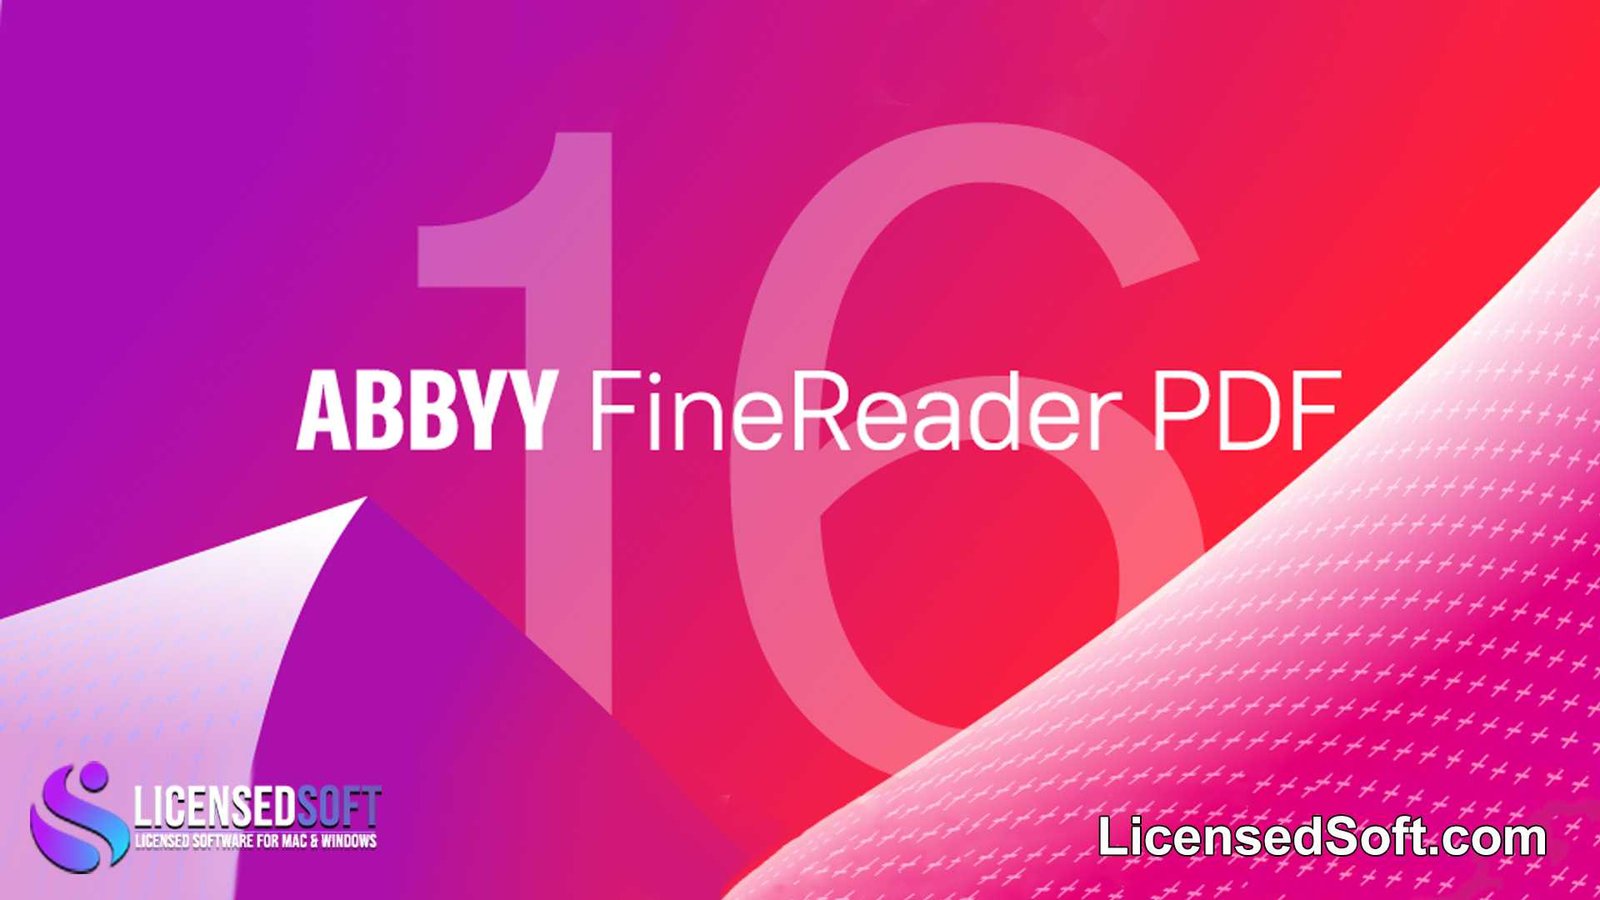 ABBYY FineReader 16 Corporate Lifetime Premium By LicensedSoft